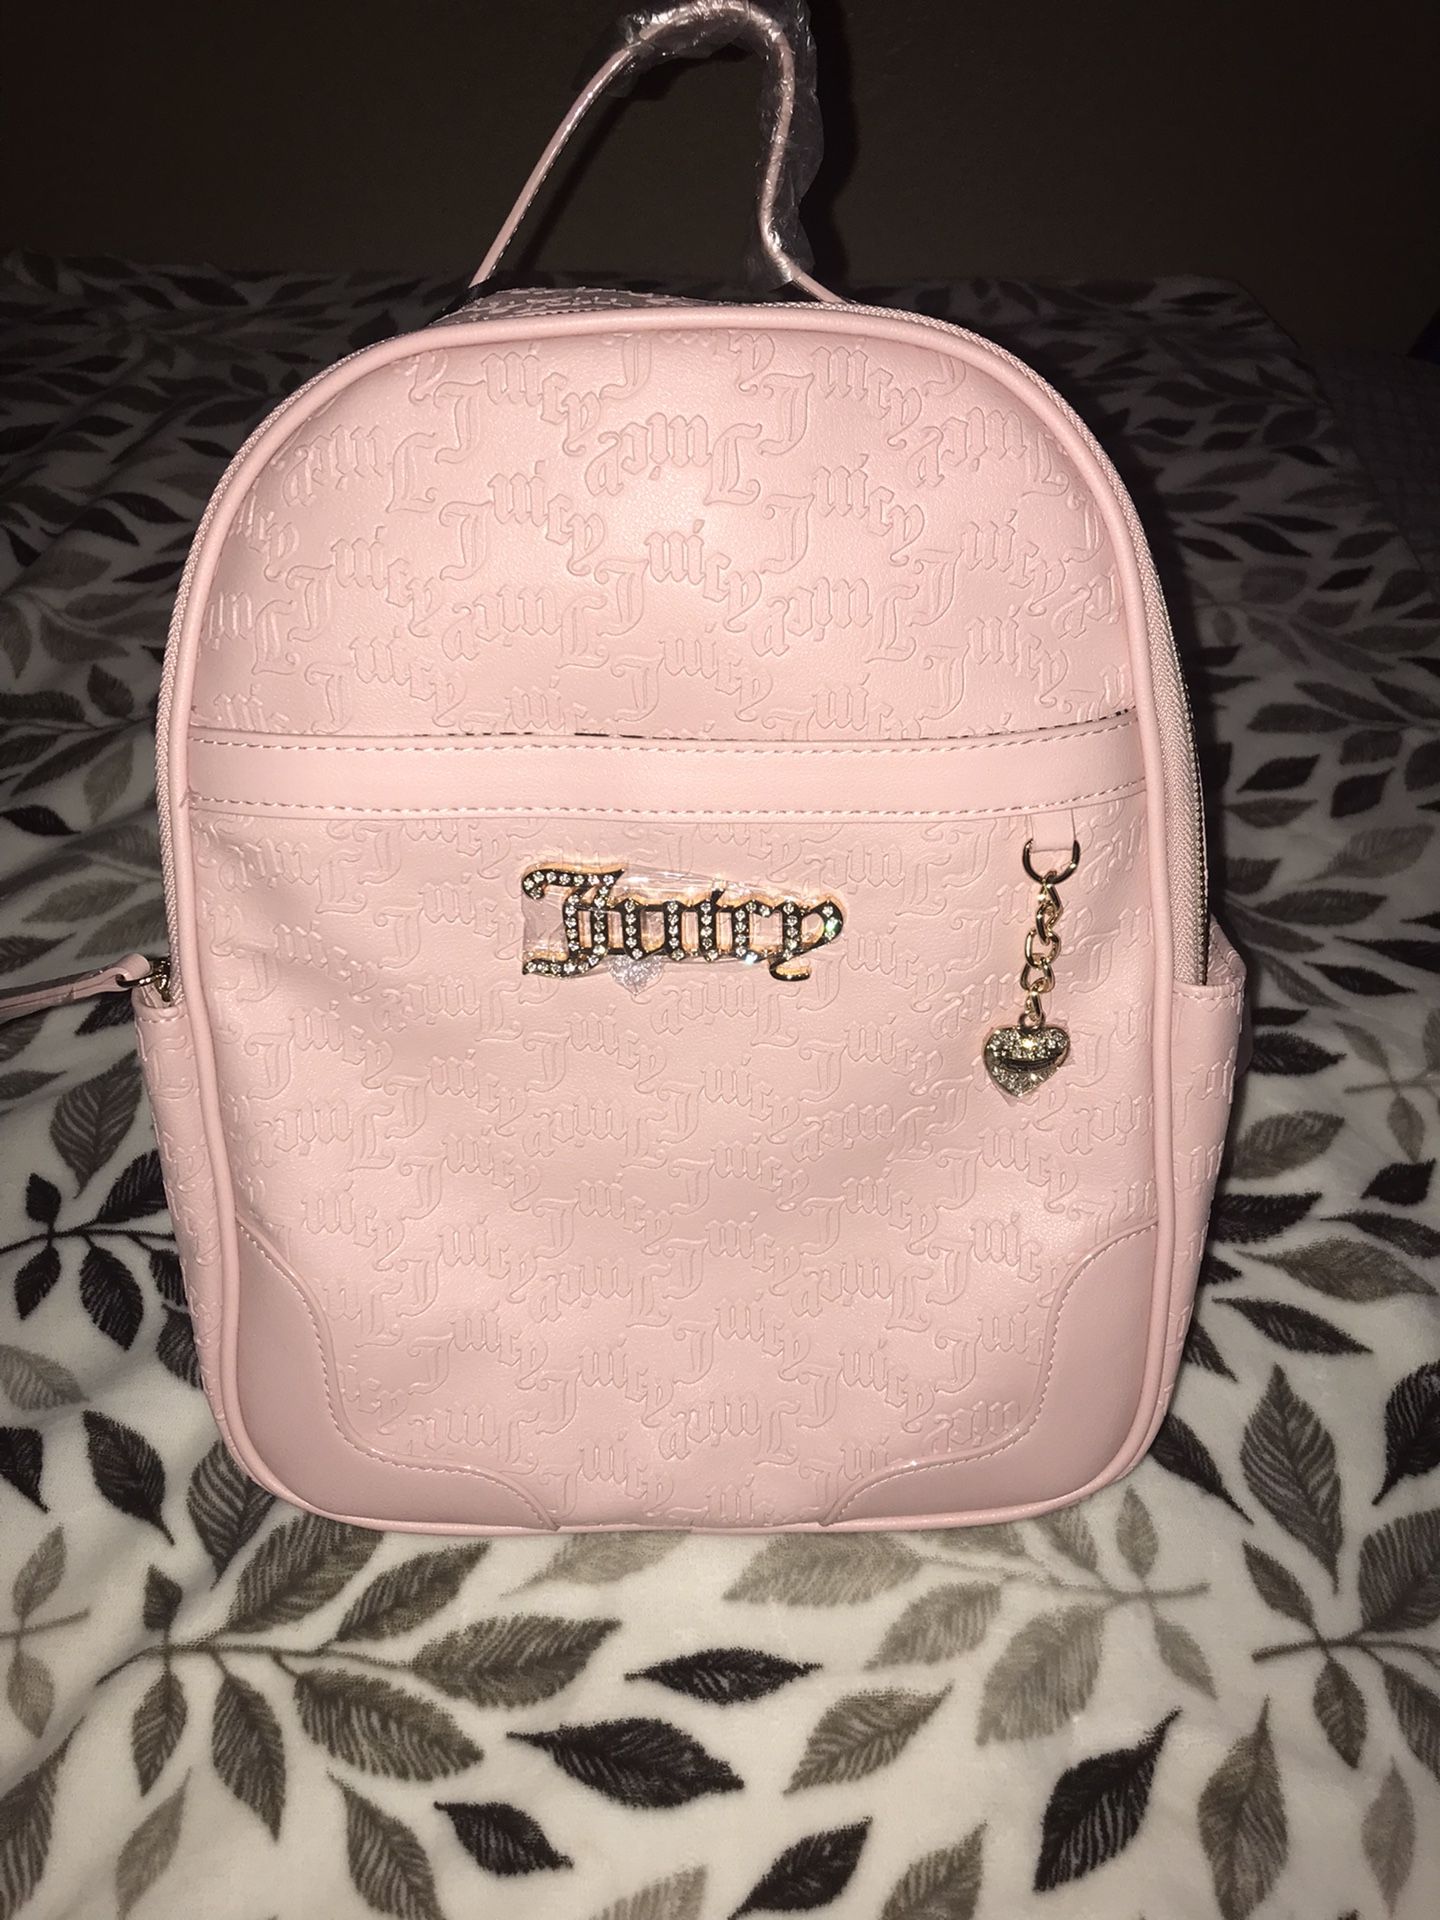 Juicy Couture Backpack 